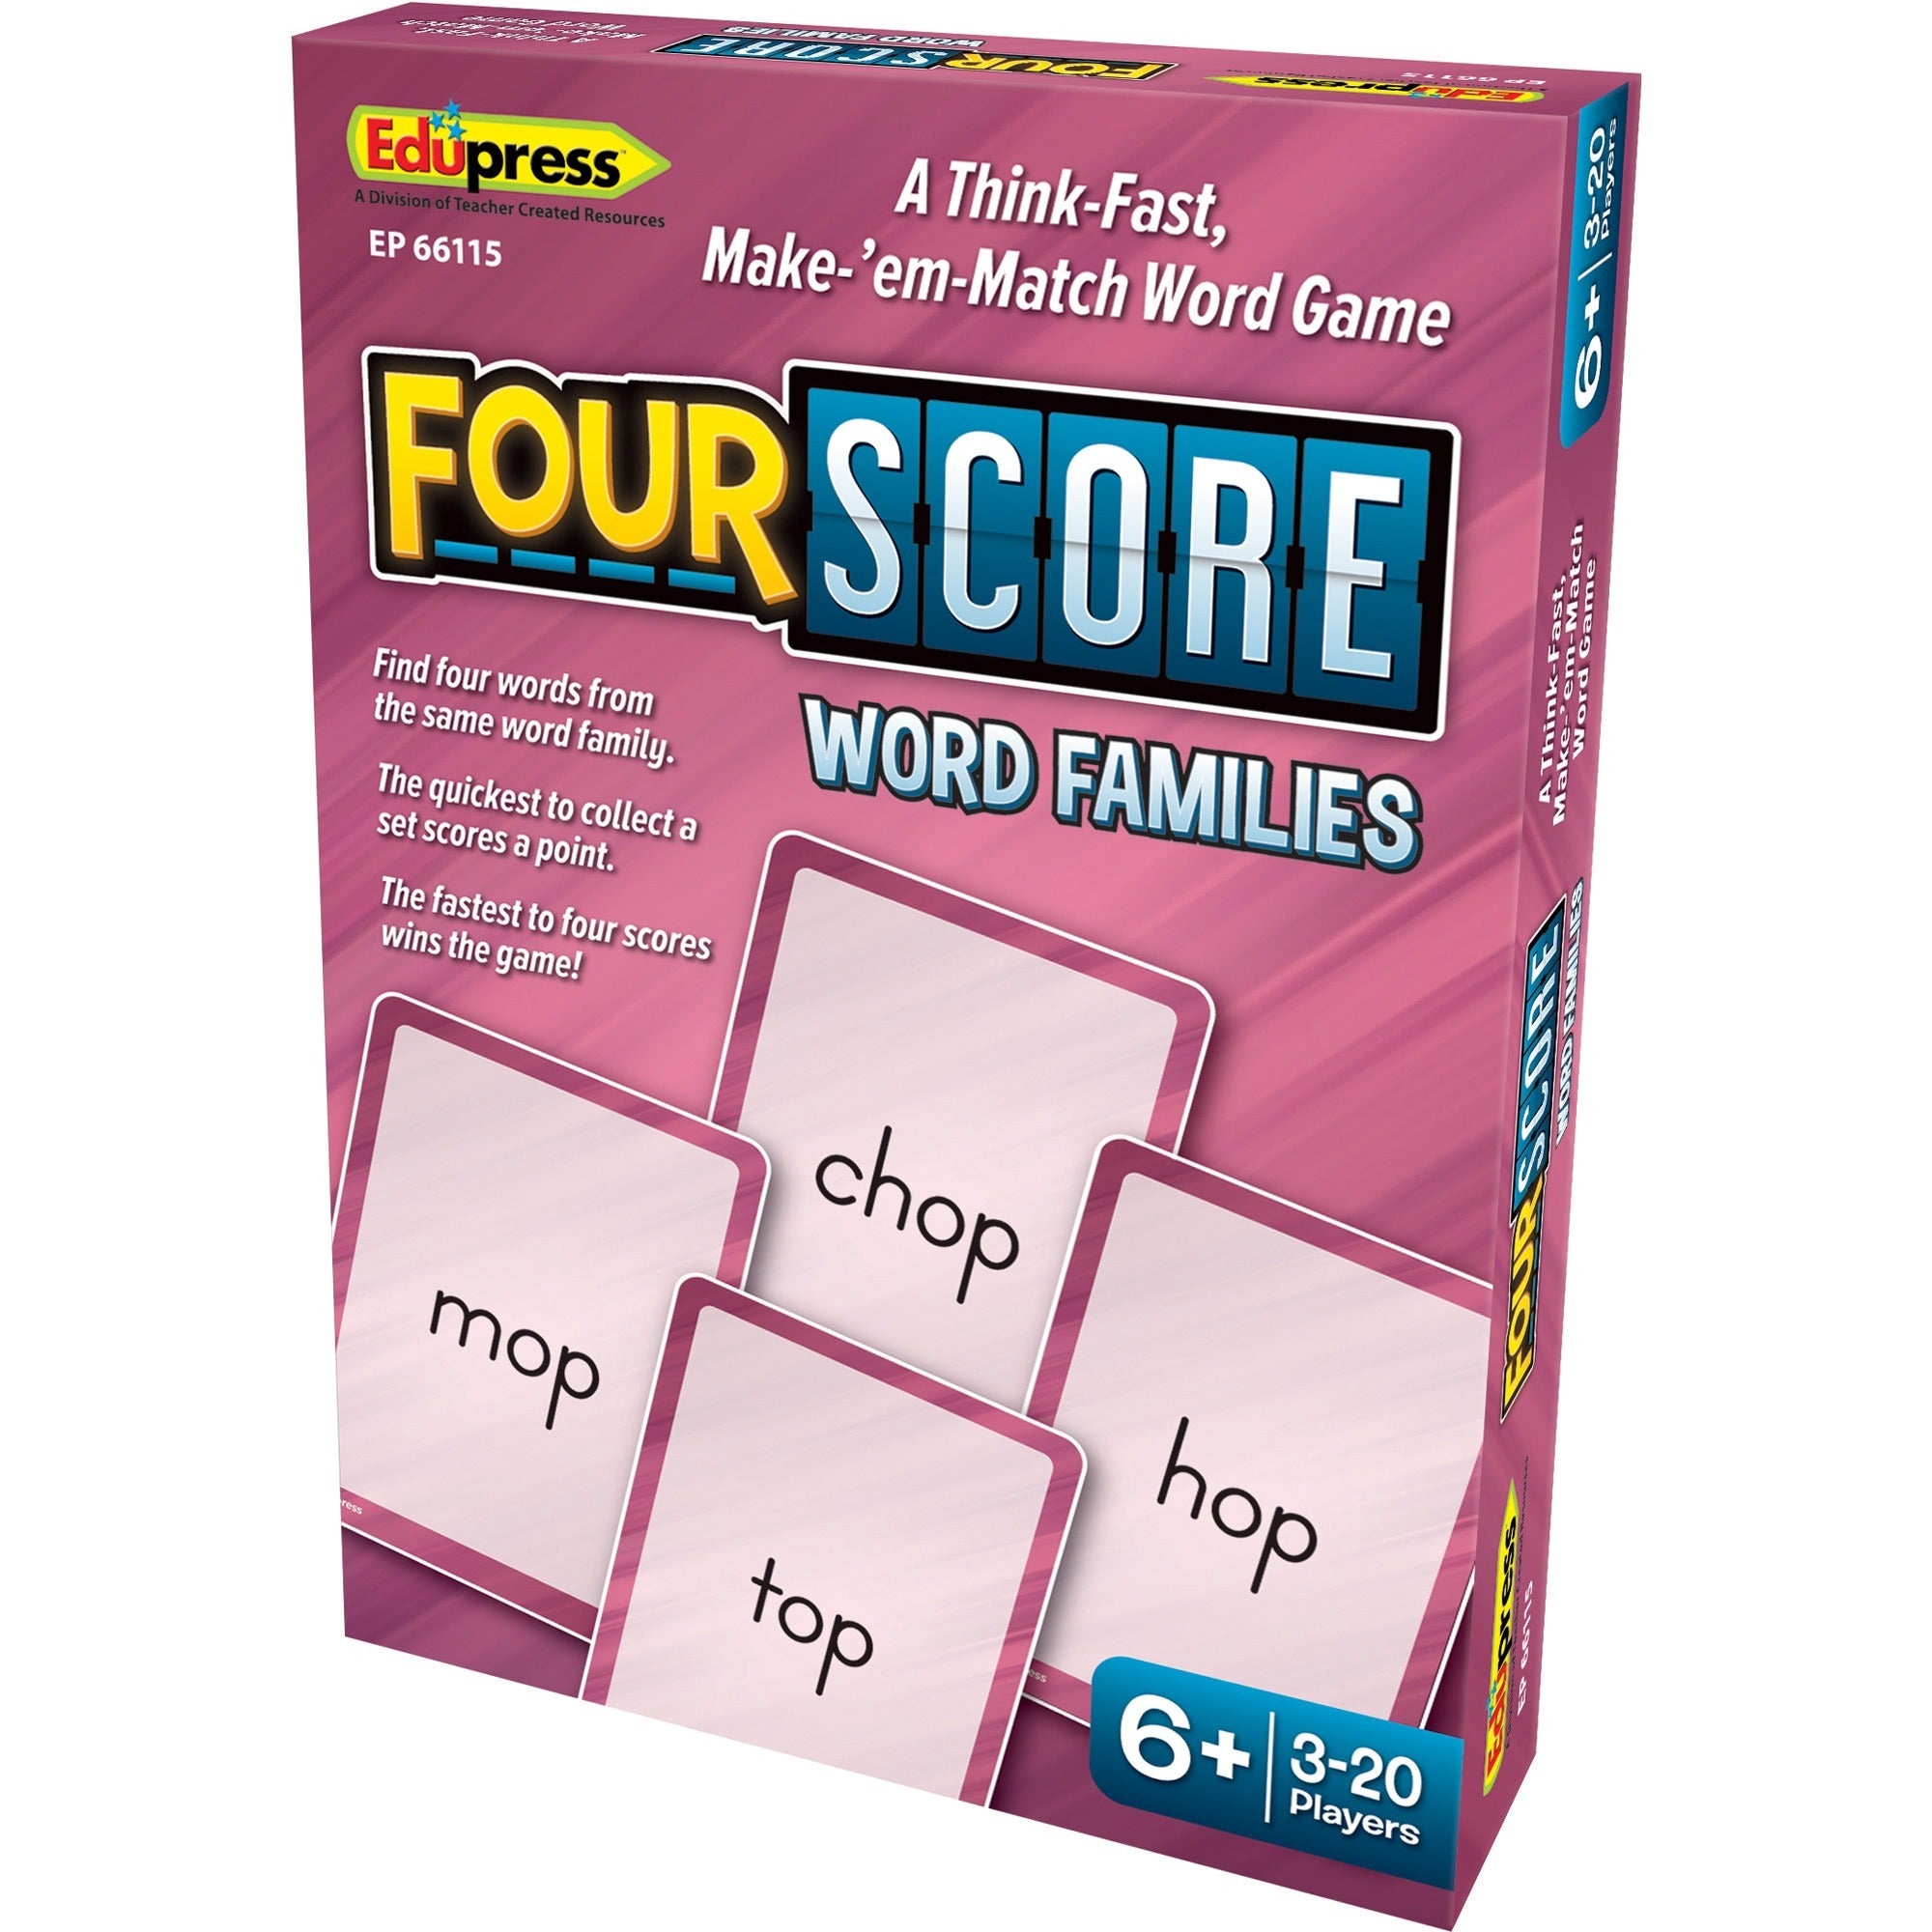 teacher-created-resources-four-score-word-card-game-matching-3-to-20-players-1-each_tcrep66115 - 1